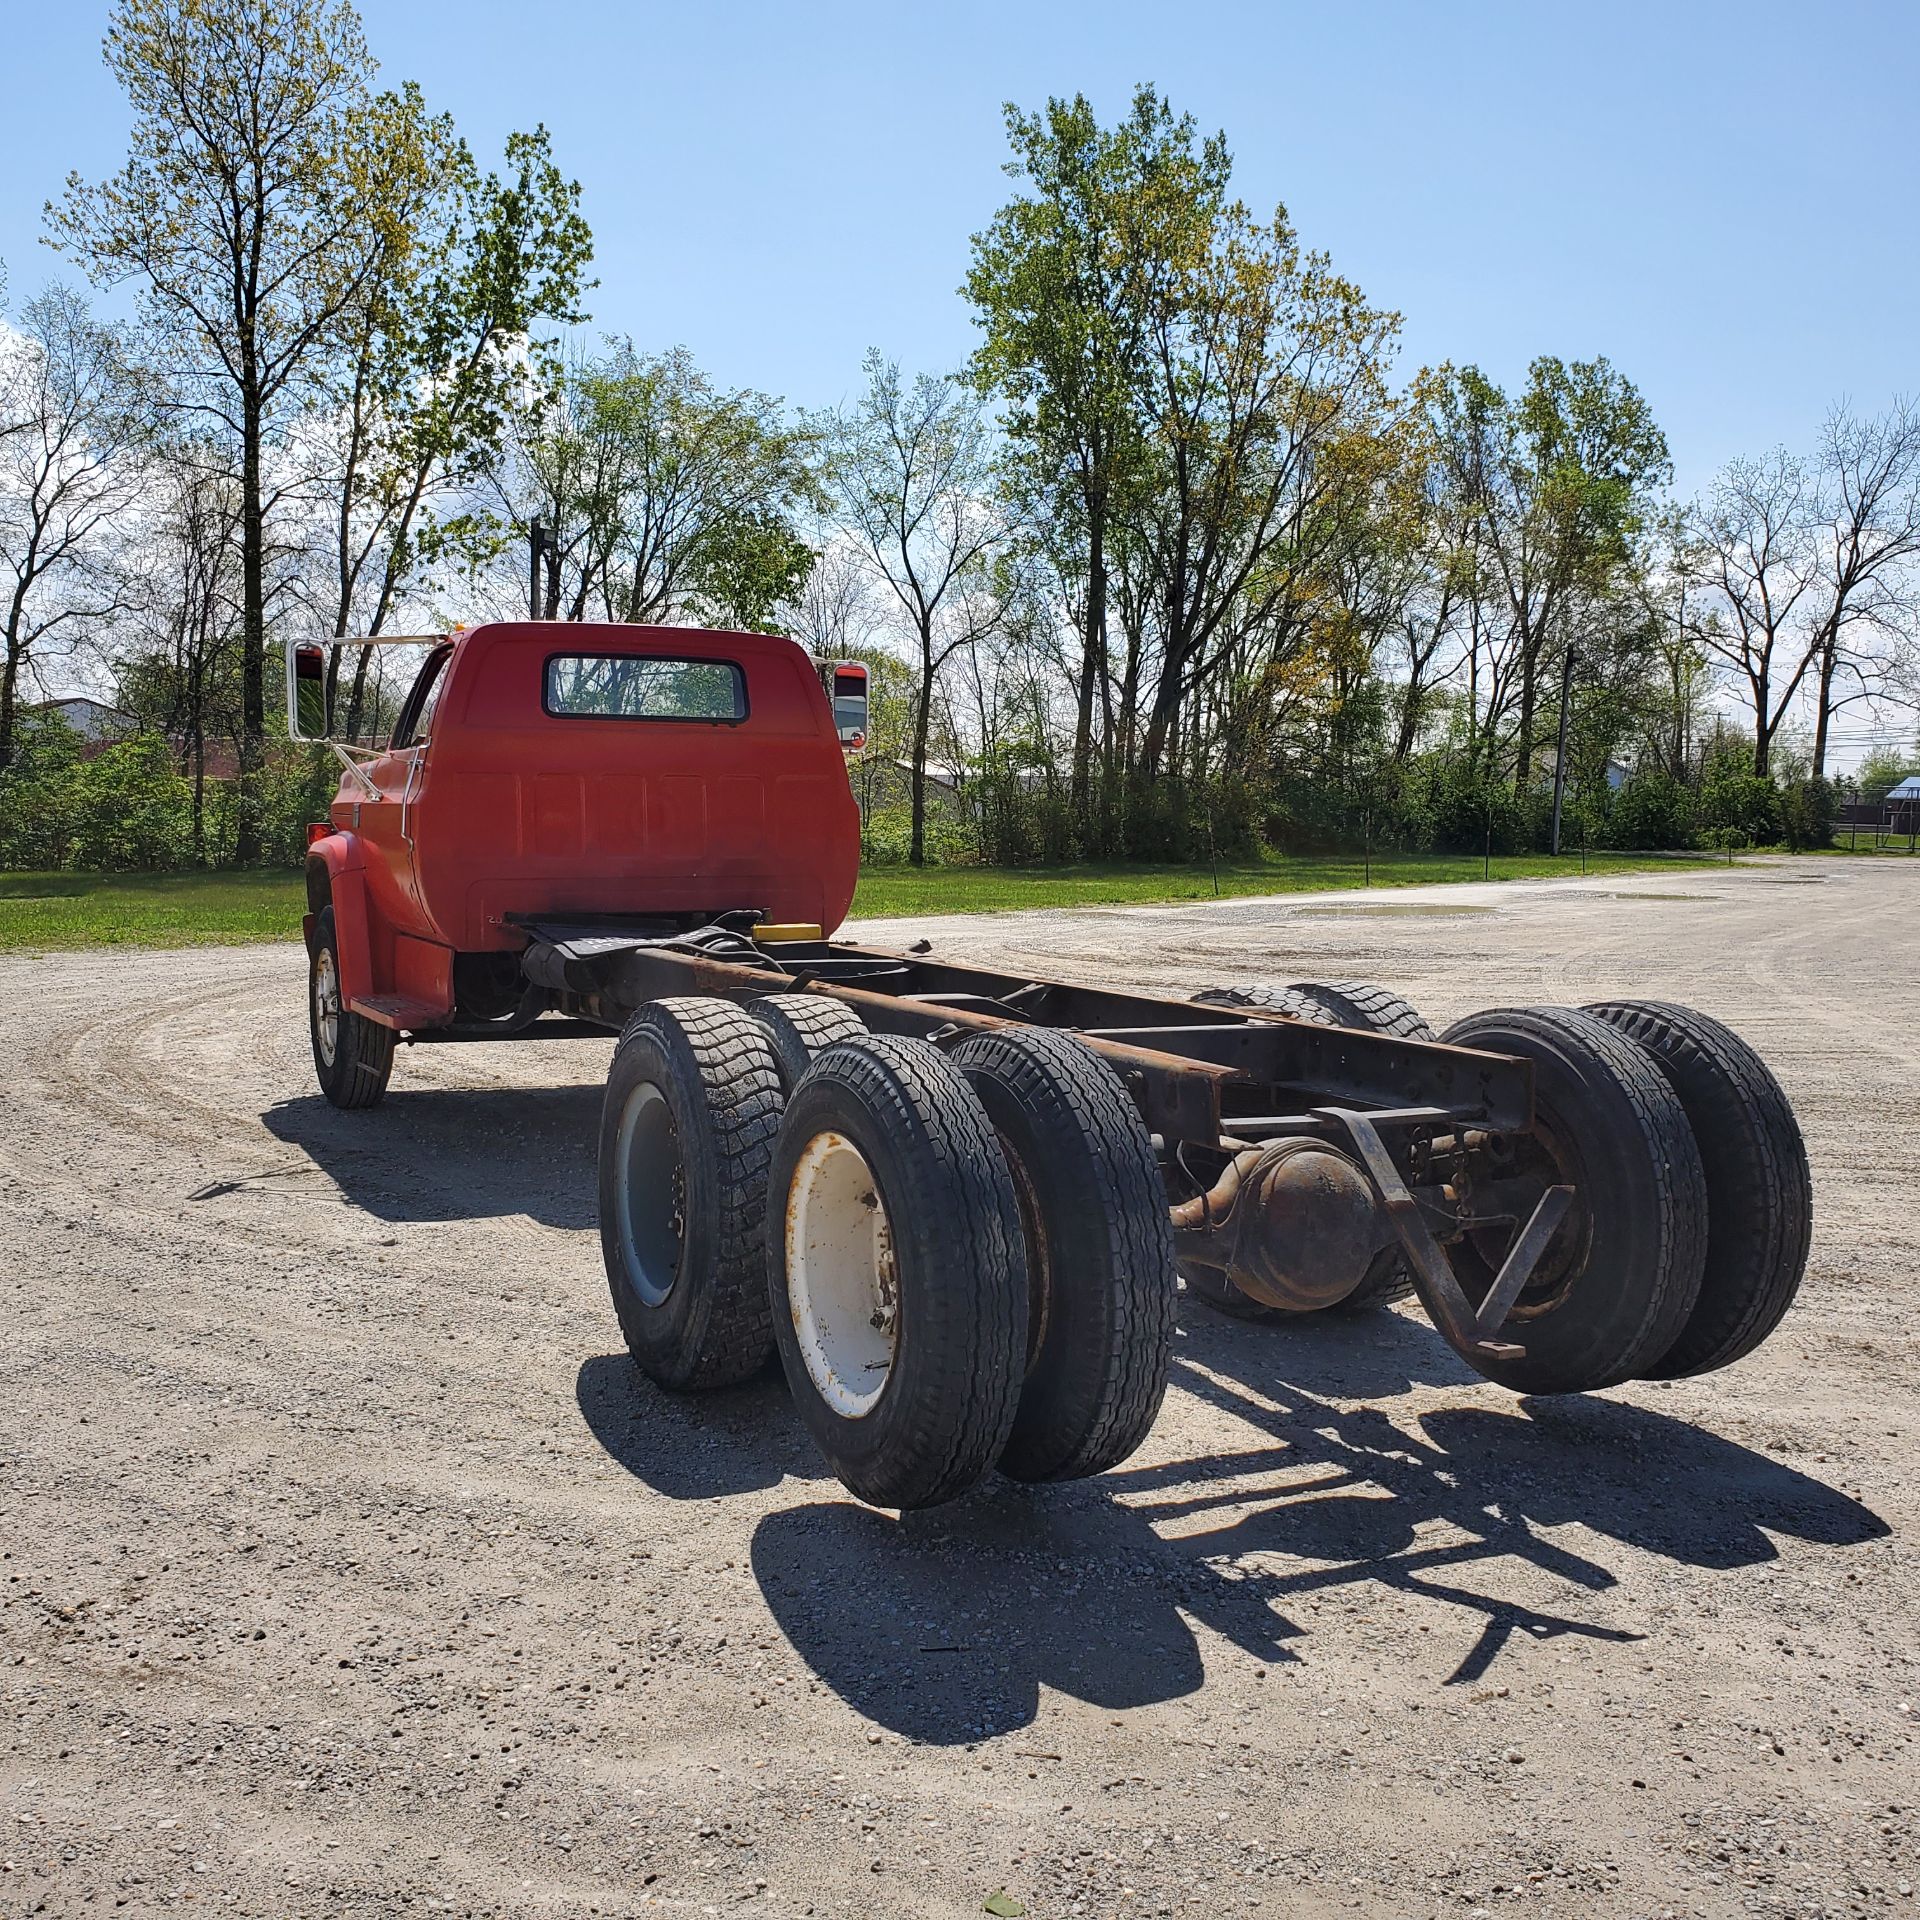 1977 Chevrolet C60 Cab and Chassis, Single Axle w/ Dual Tires and Tag Axle, 5 Speed Transmission - Image 6 of 19